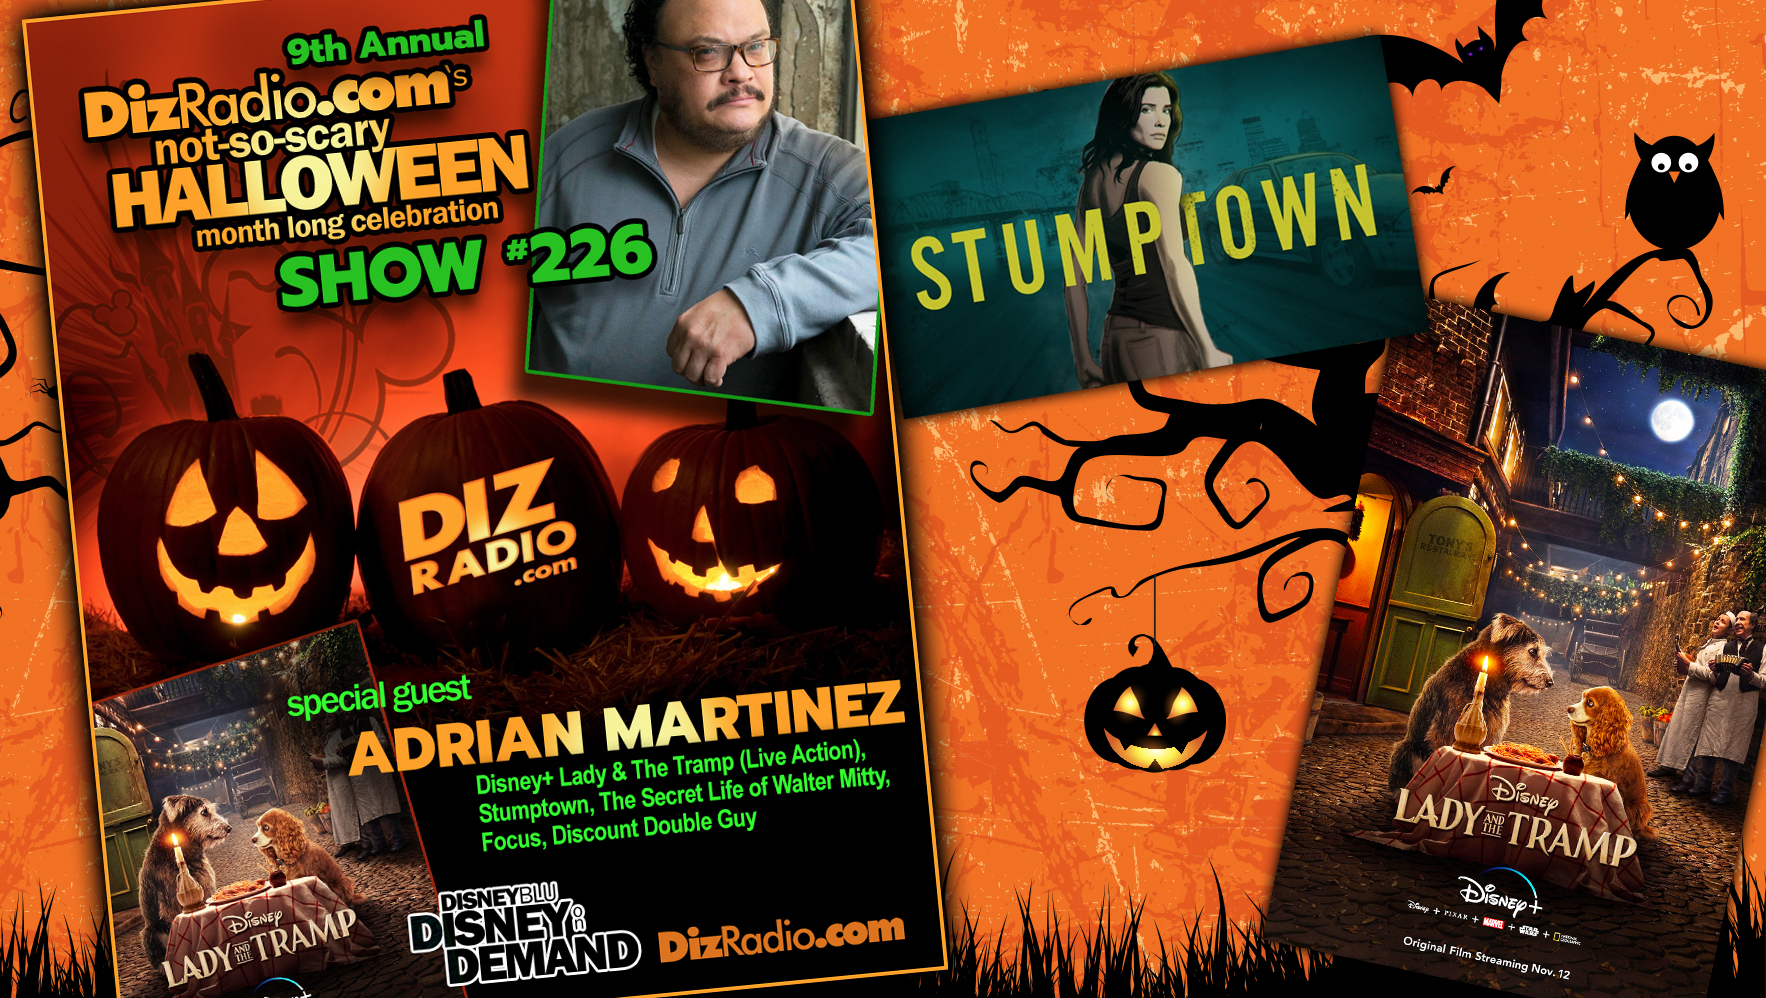 DisneyBlu's DizRadio Disney on Demand Show #226 w/ Guest ADRIAN MARTINEZ (Live Action Lady and the Tramp, Stumptown, Secret Life of Walter Mitty and more)